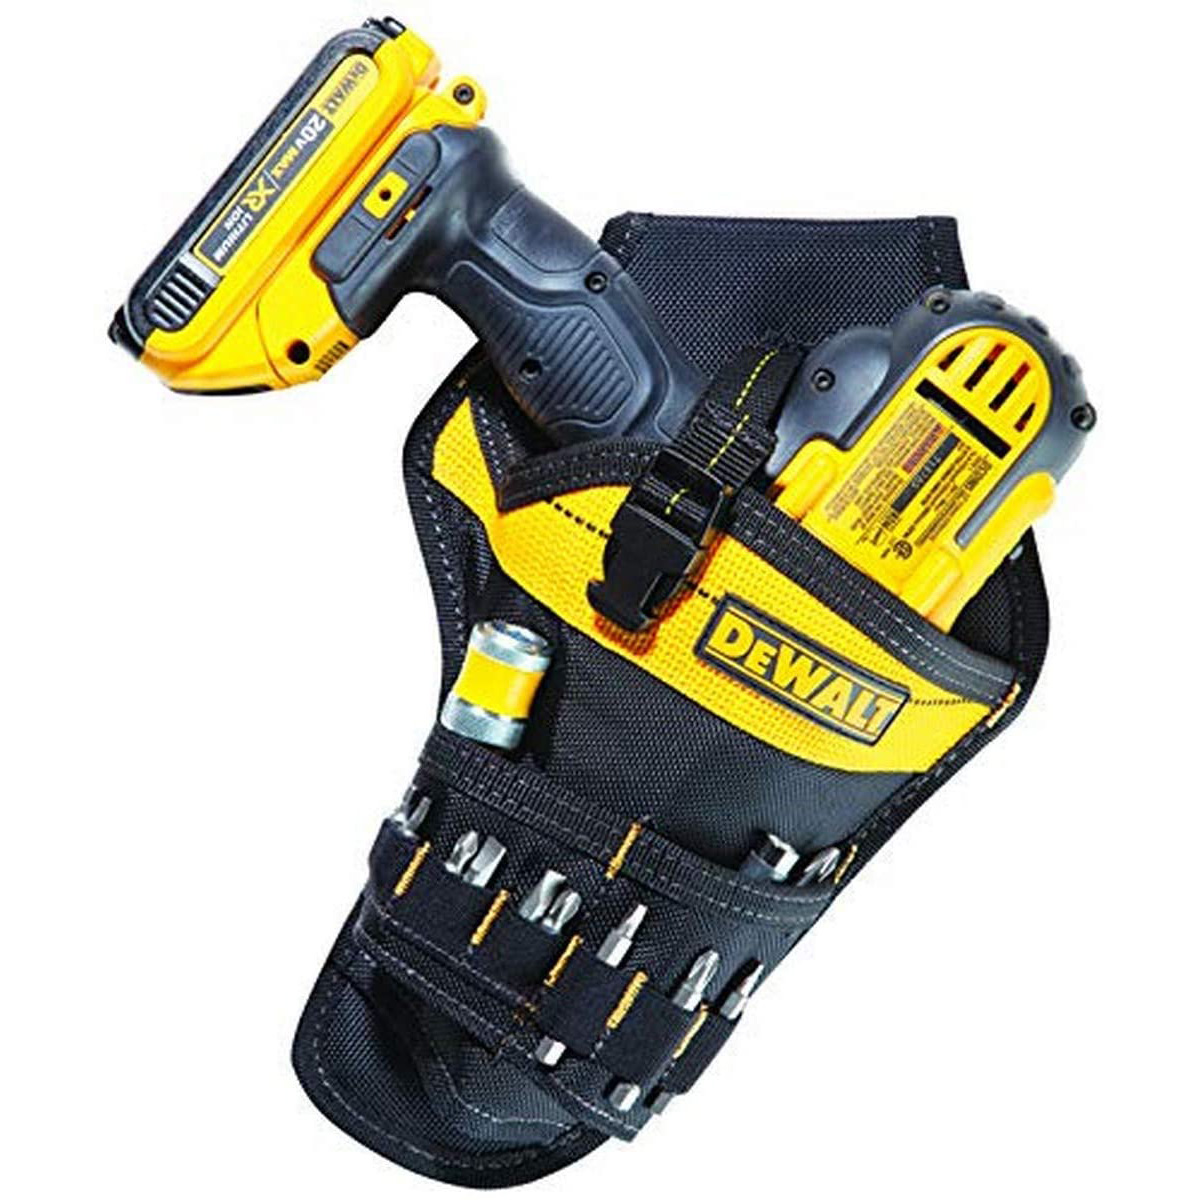 Read more about the article DEWALT – Heavy-duty Drill Holster